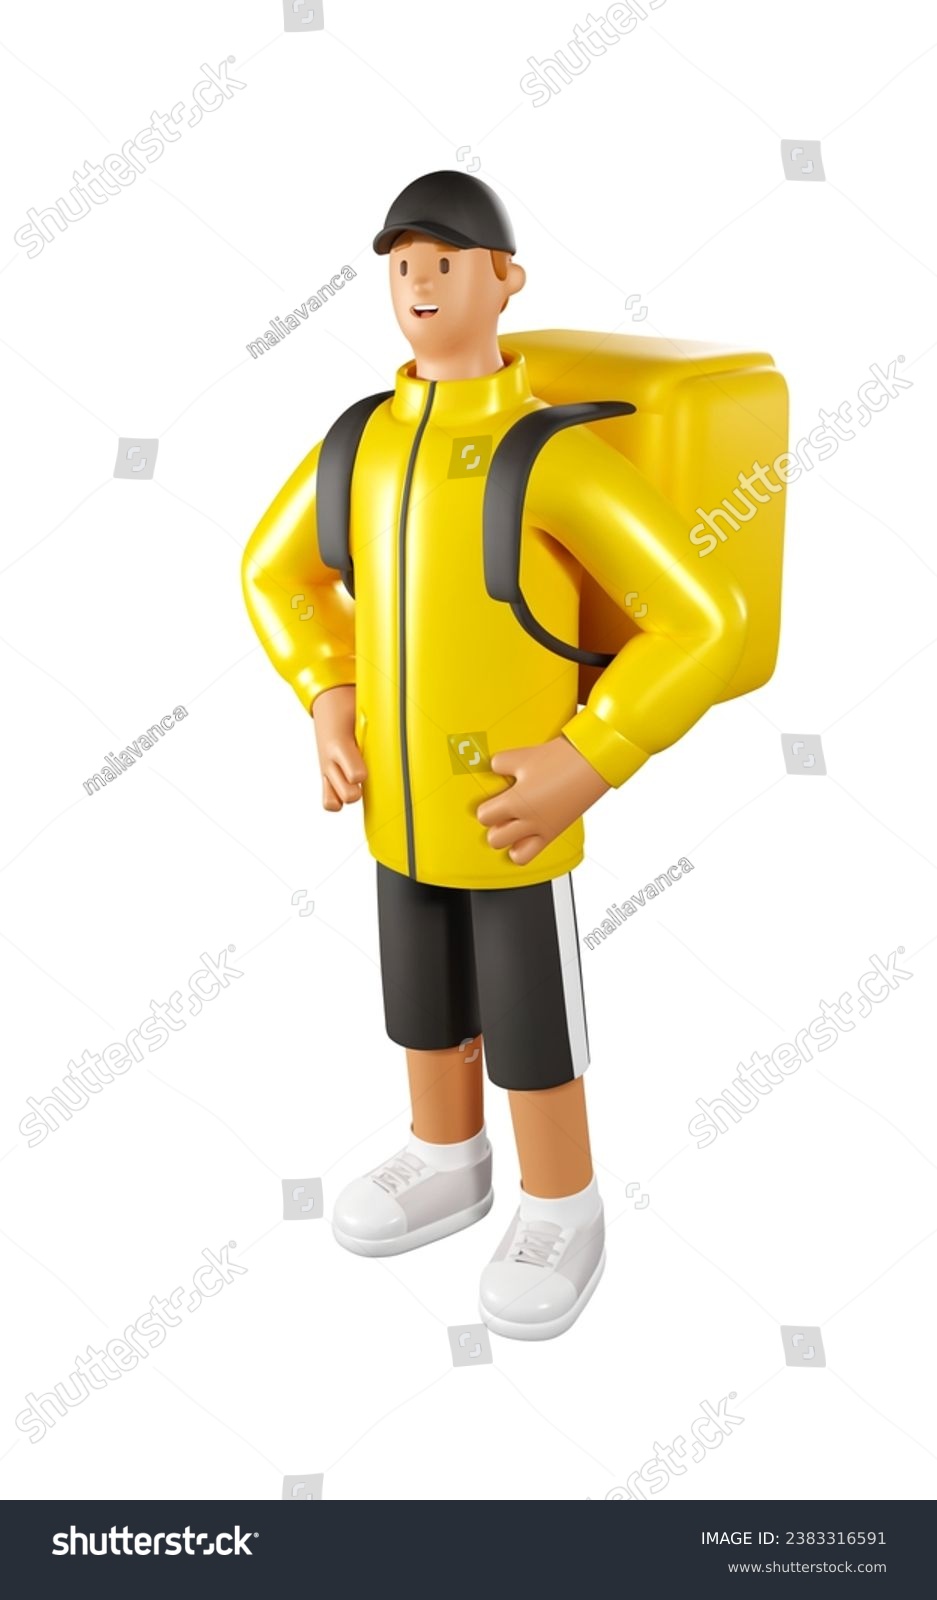 SVG of 3D Food Delivery Man Vector Illustration. Cartoon Male Character of Deliveryman in a yellow jacket svg